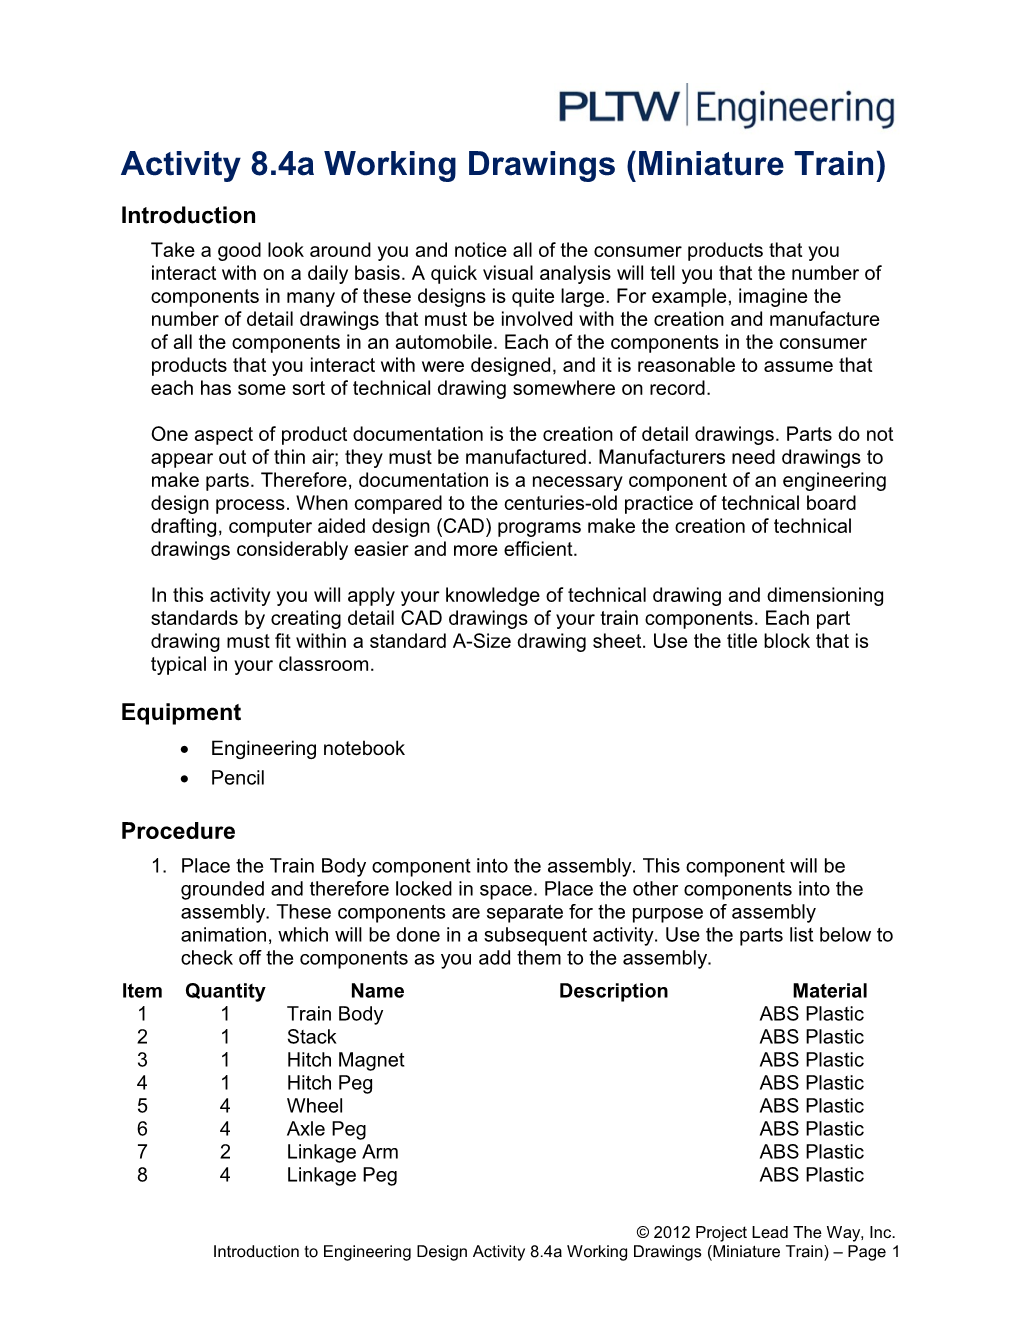 Activity 8.4A Working Drawings (Miniature Train)